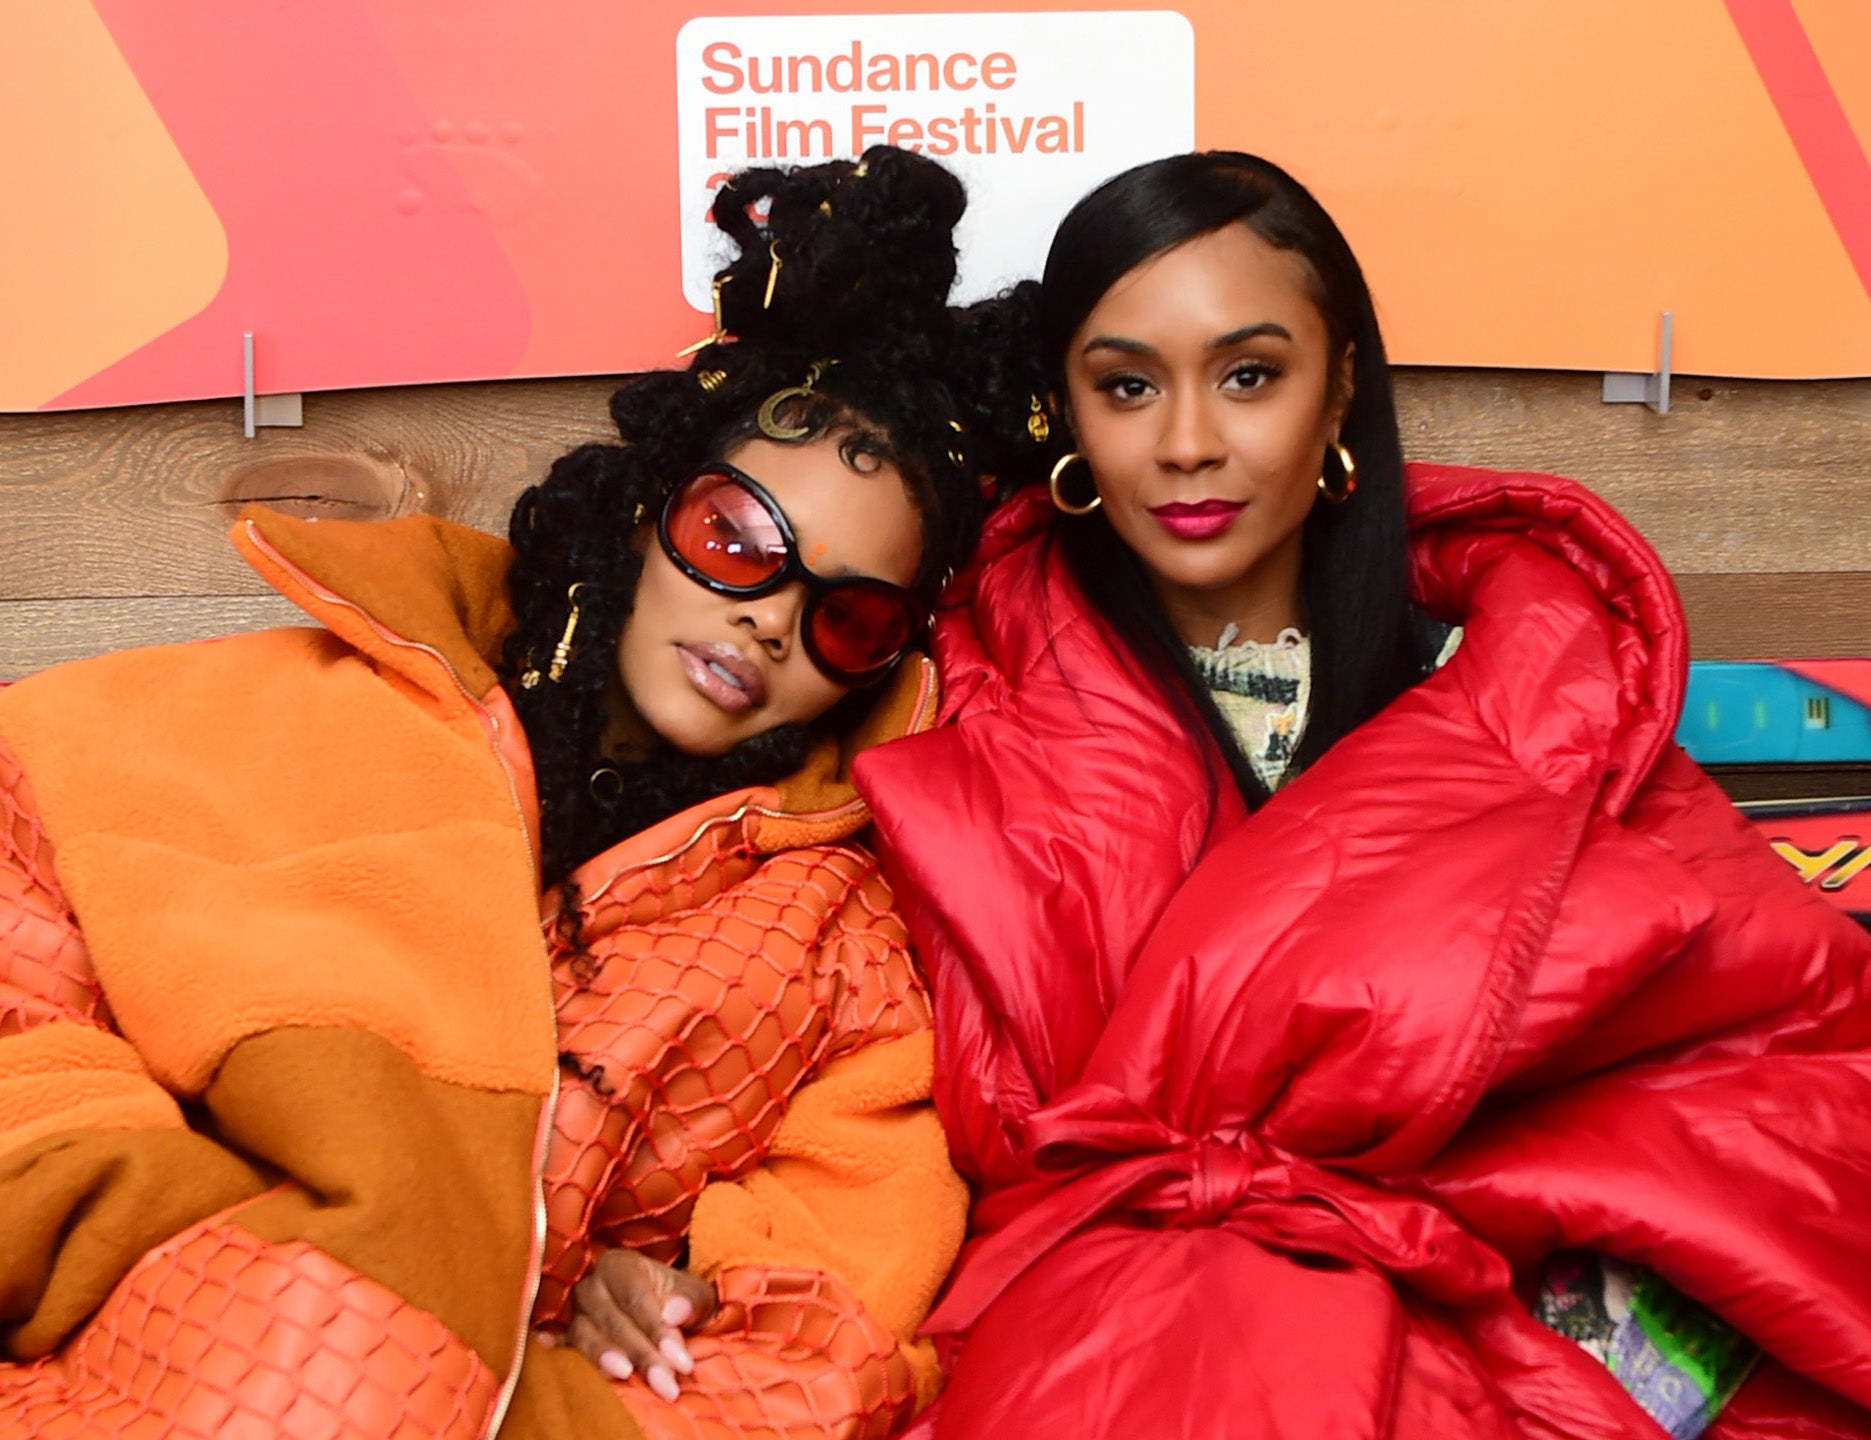 Director A.V. Rockwell Wins Sundance Grand Jury Prize With ‘A Thousand And One’ Starring Teyana Taylor